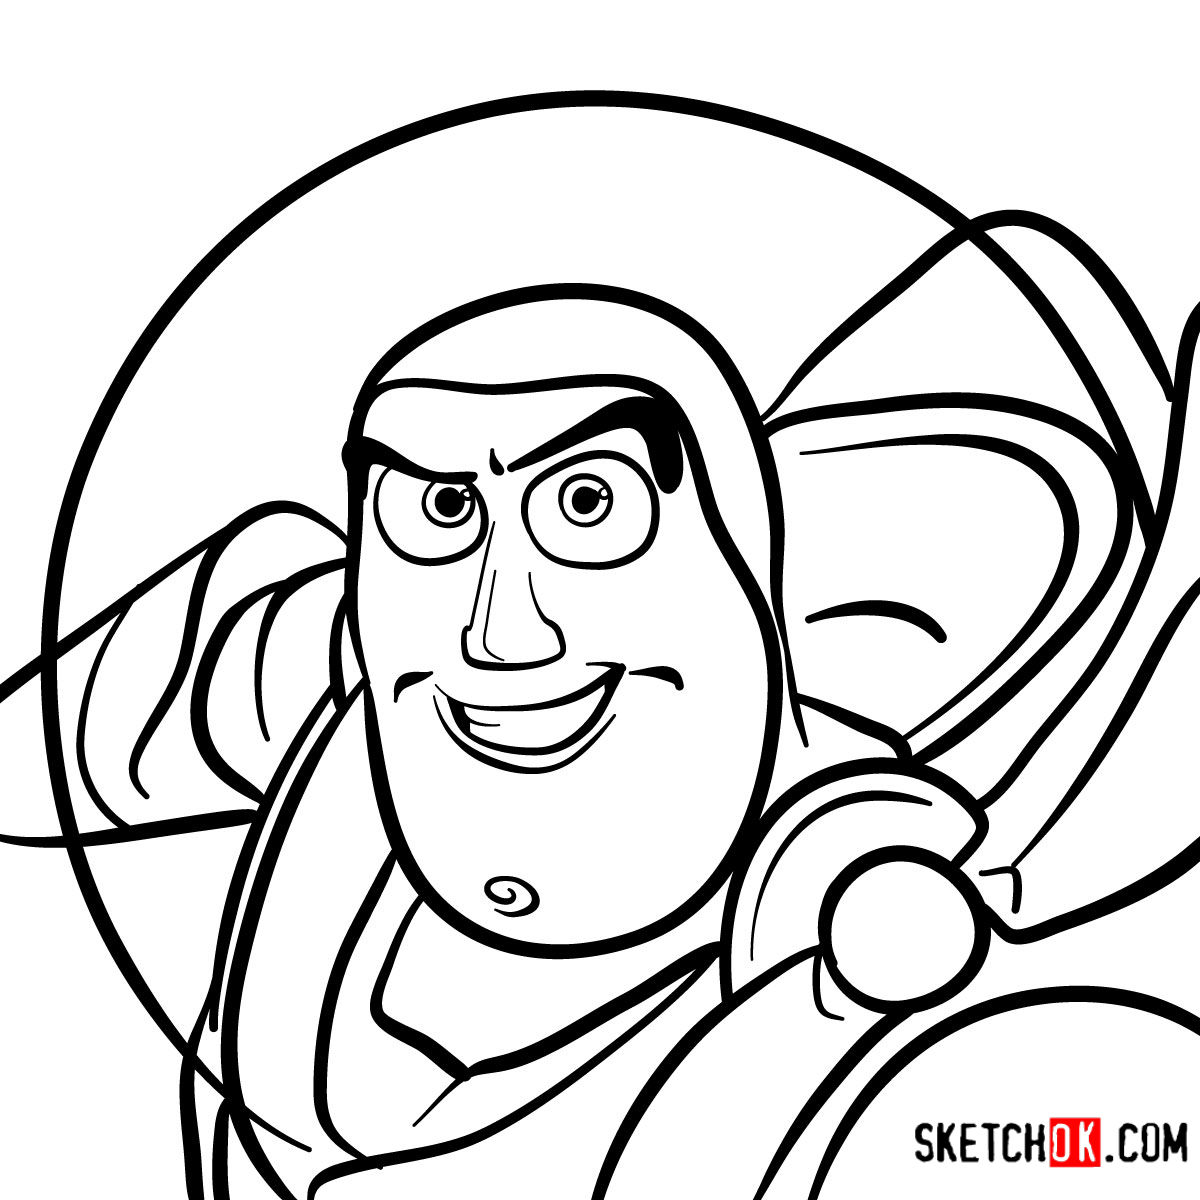 How to draw Buzz Lightyear's face